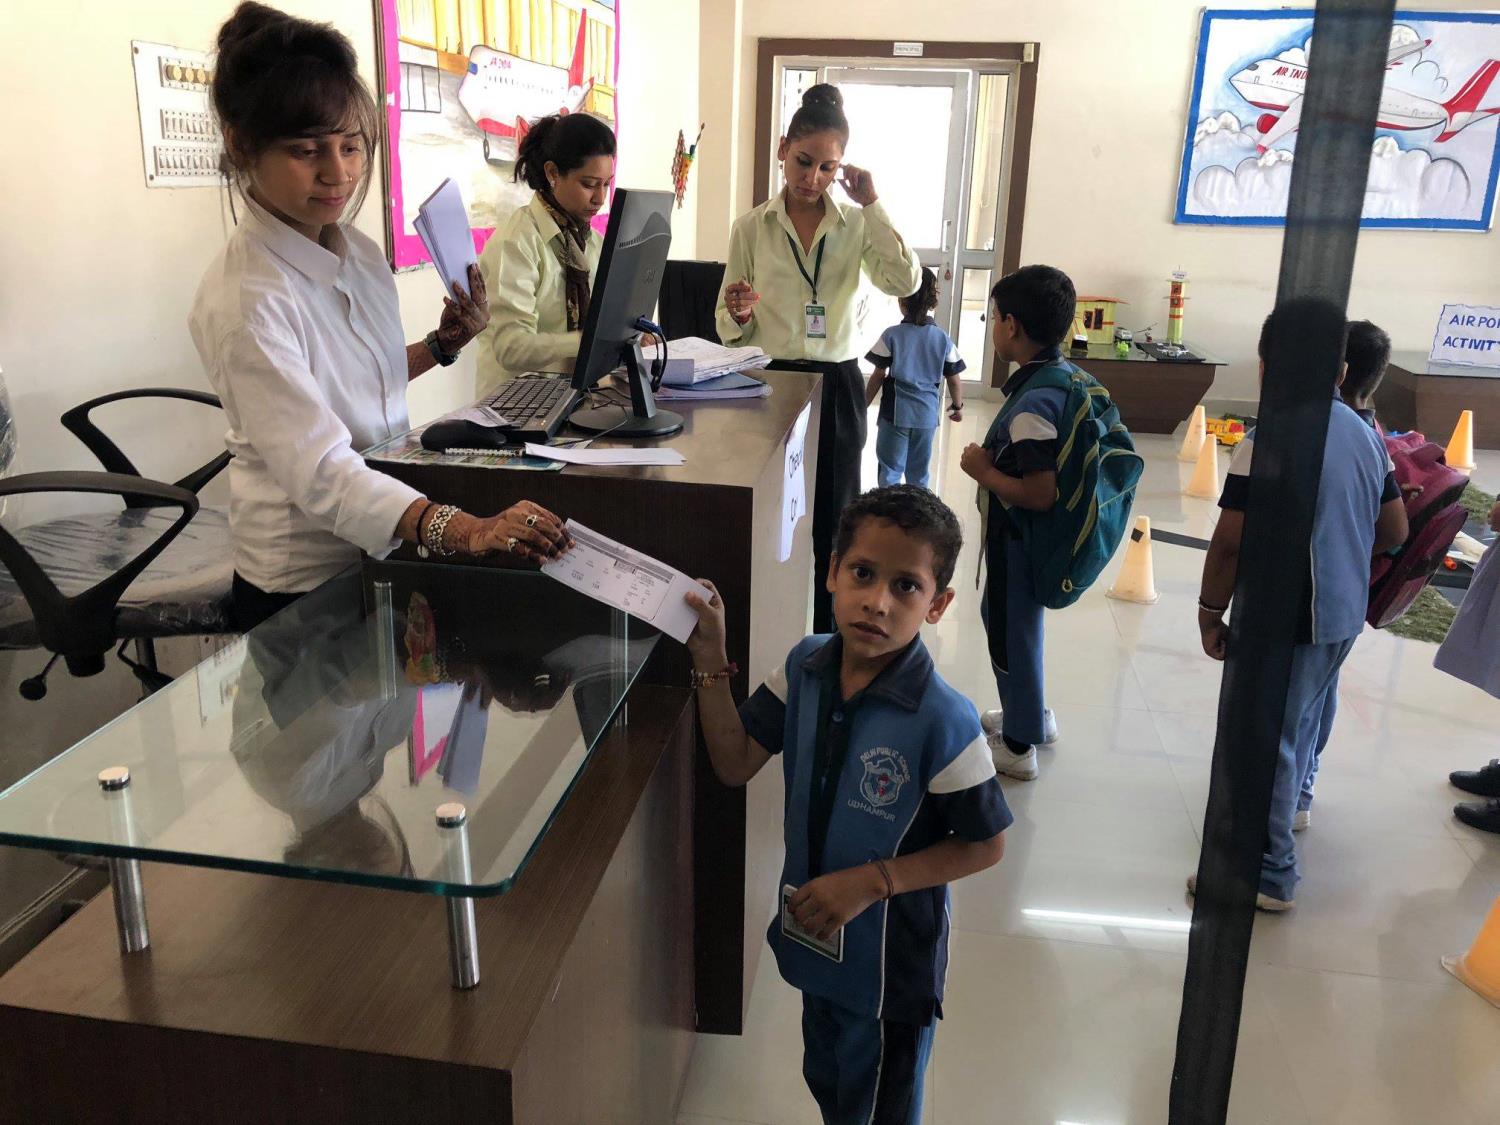 Delhi Public School organized an Airport activity for the Pre-Primary students. (13-10-2018)